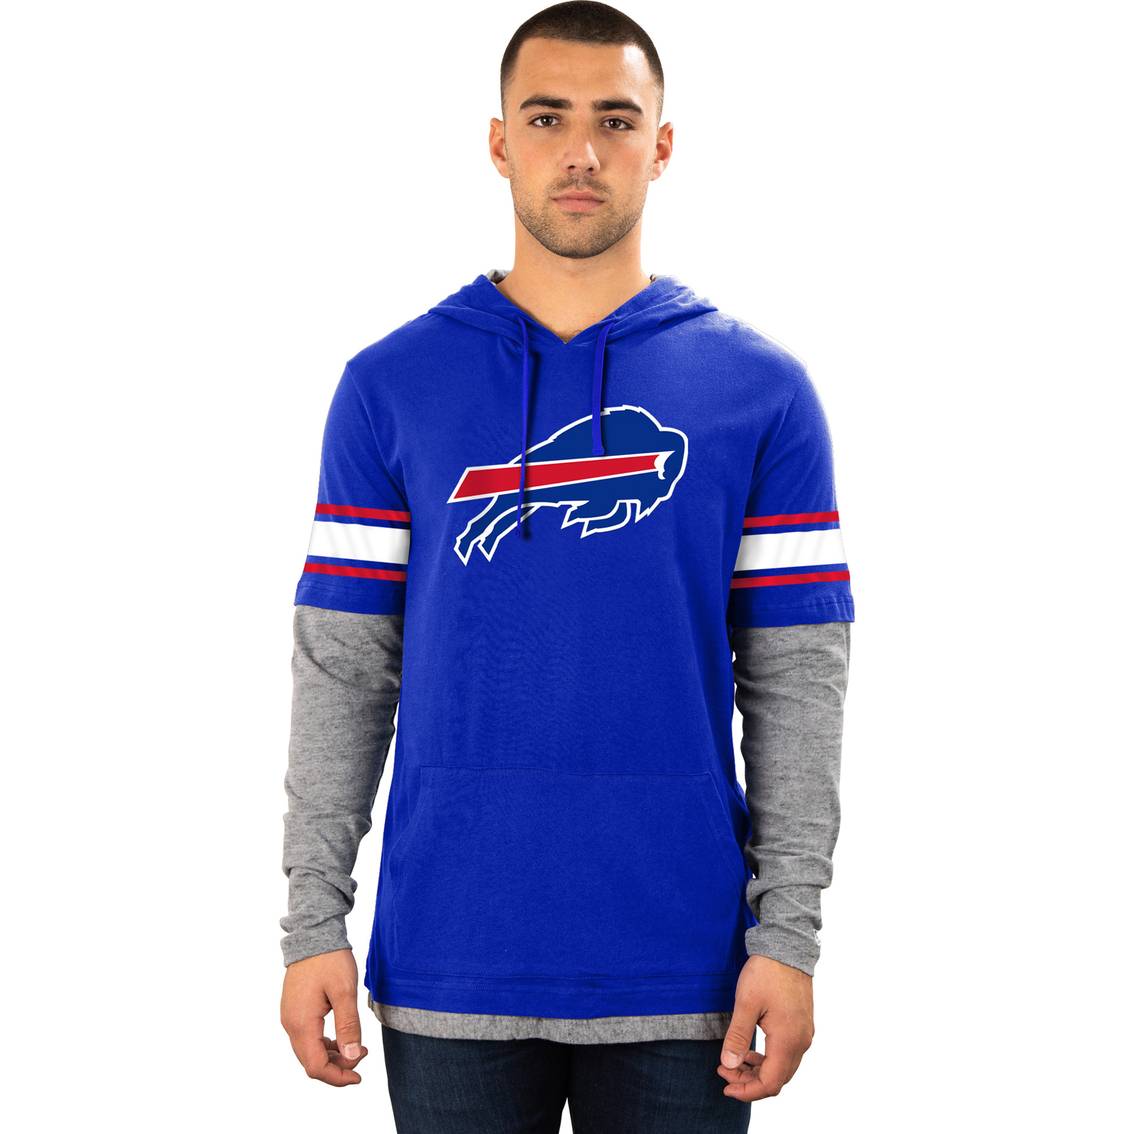 New Era Cap Co. NFL Team Brushed Cotton Pullover Hoodie - Image 4 of 5